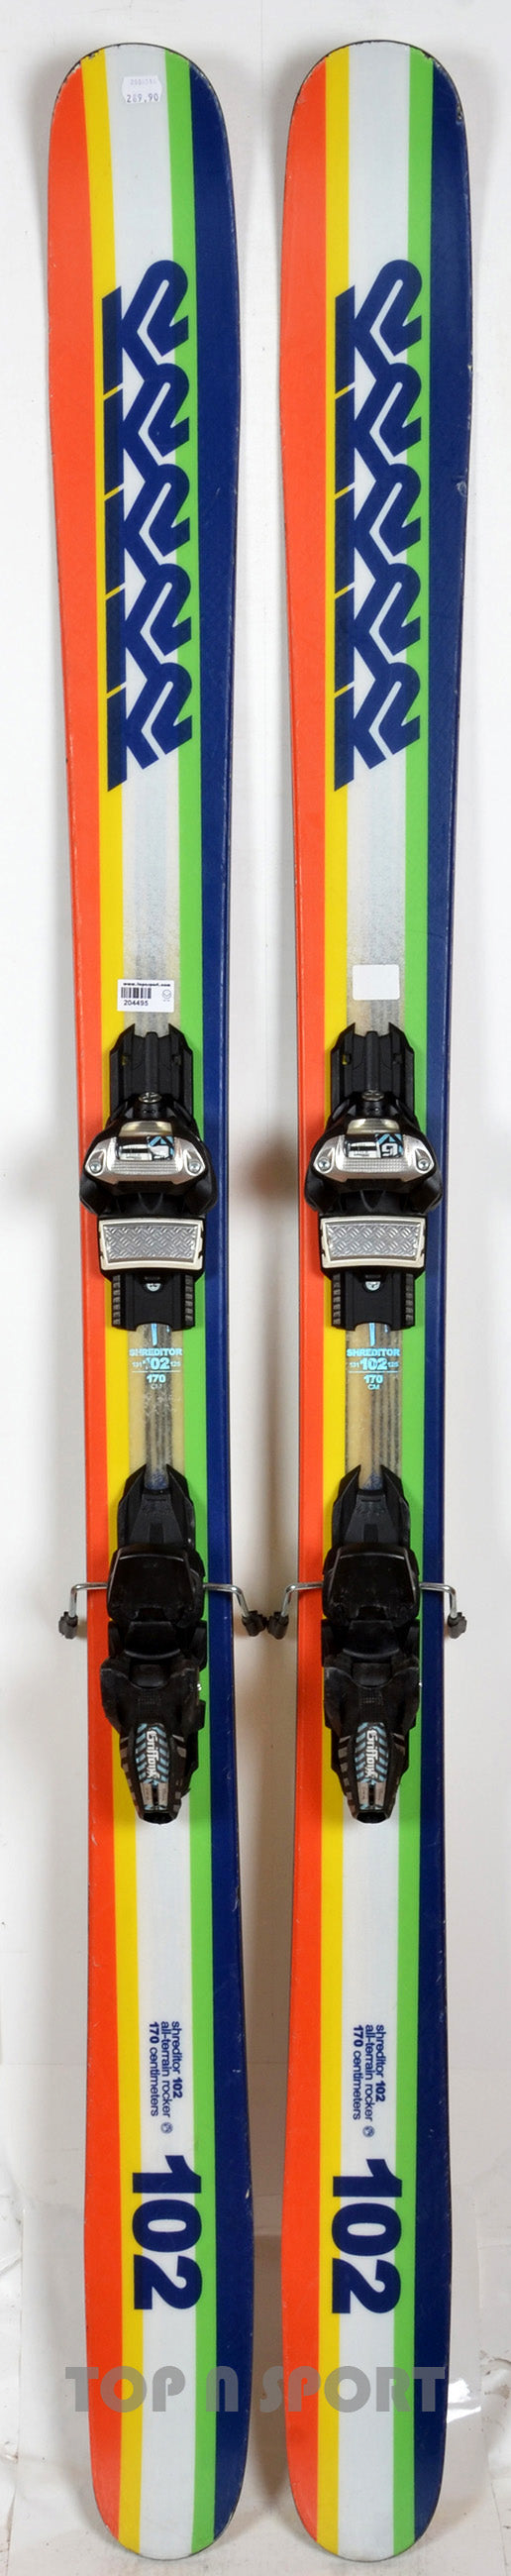 K2 SHREDITOR 102 - skis d'occasion